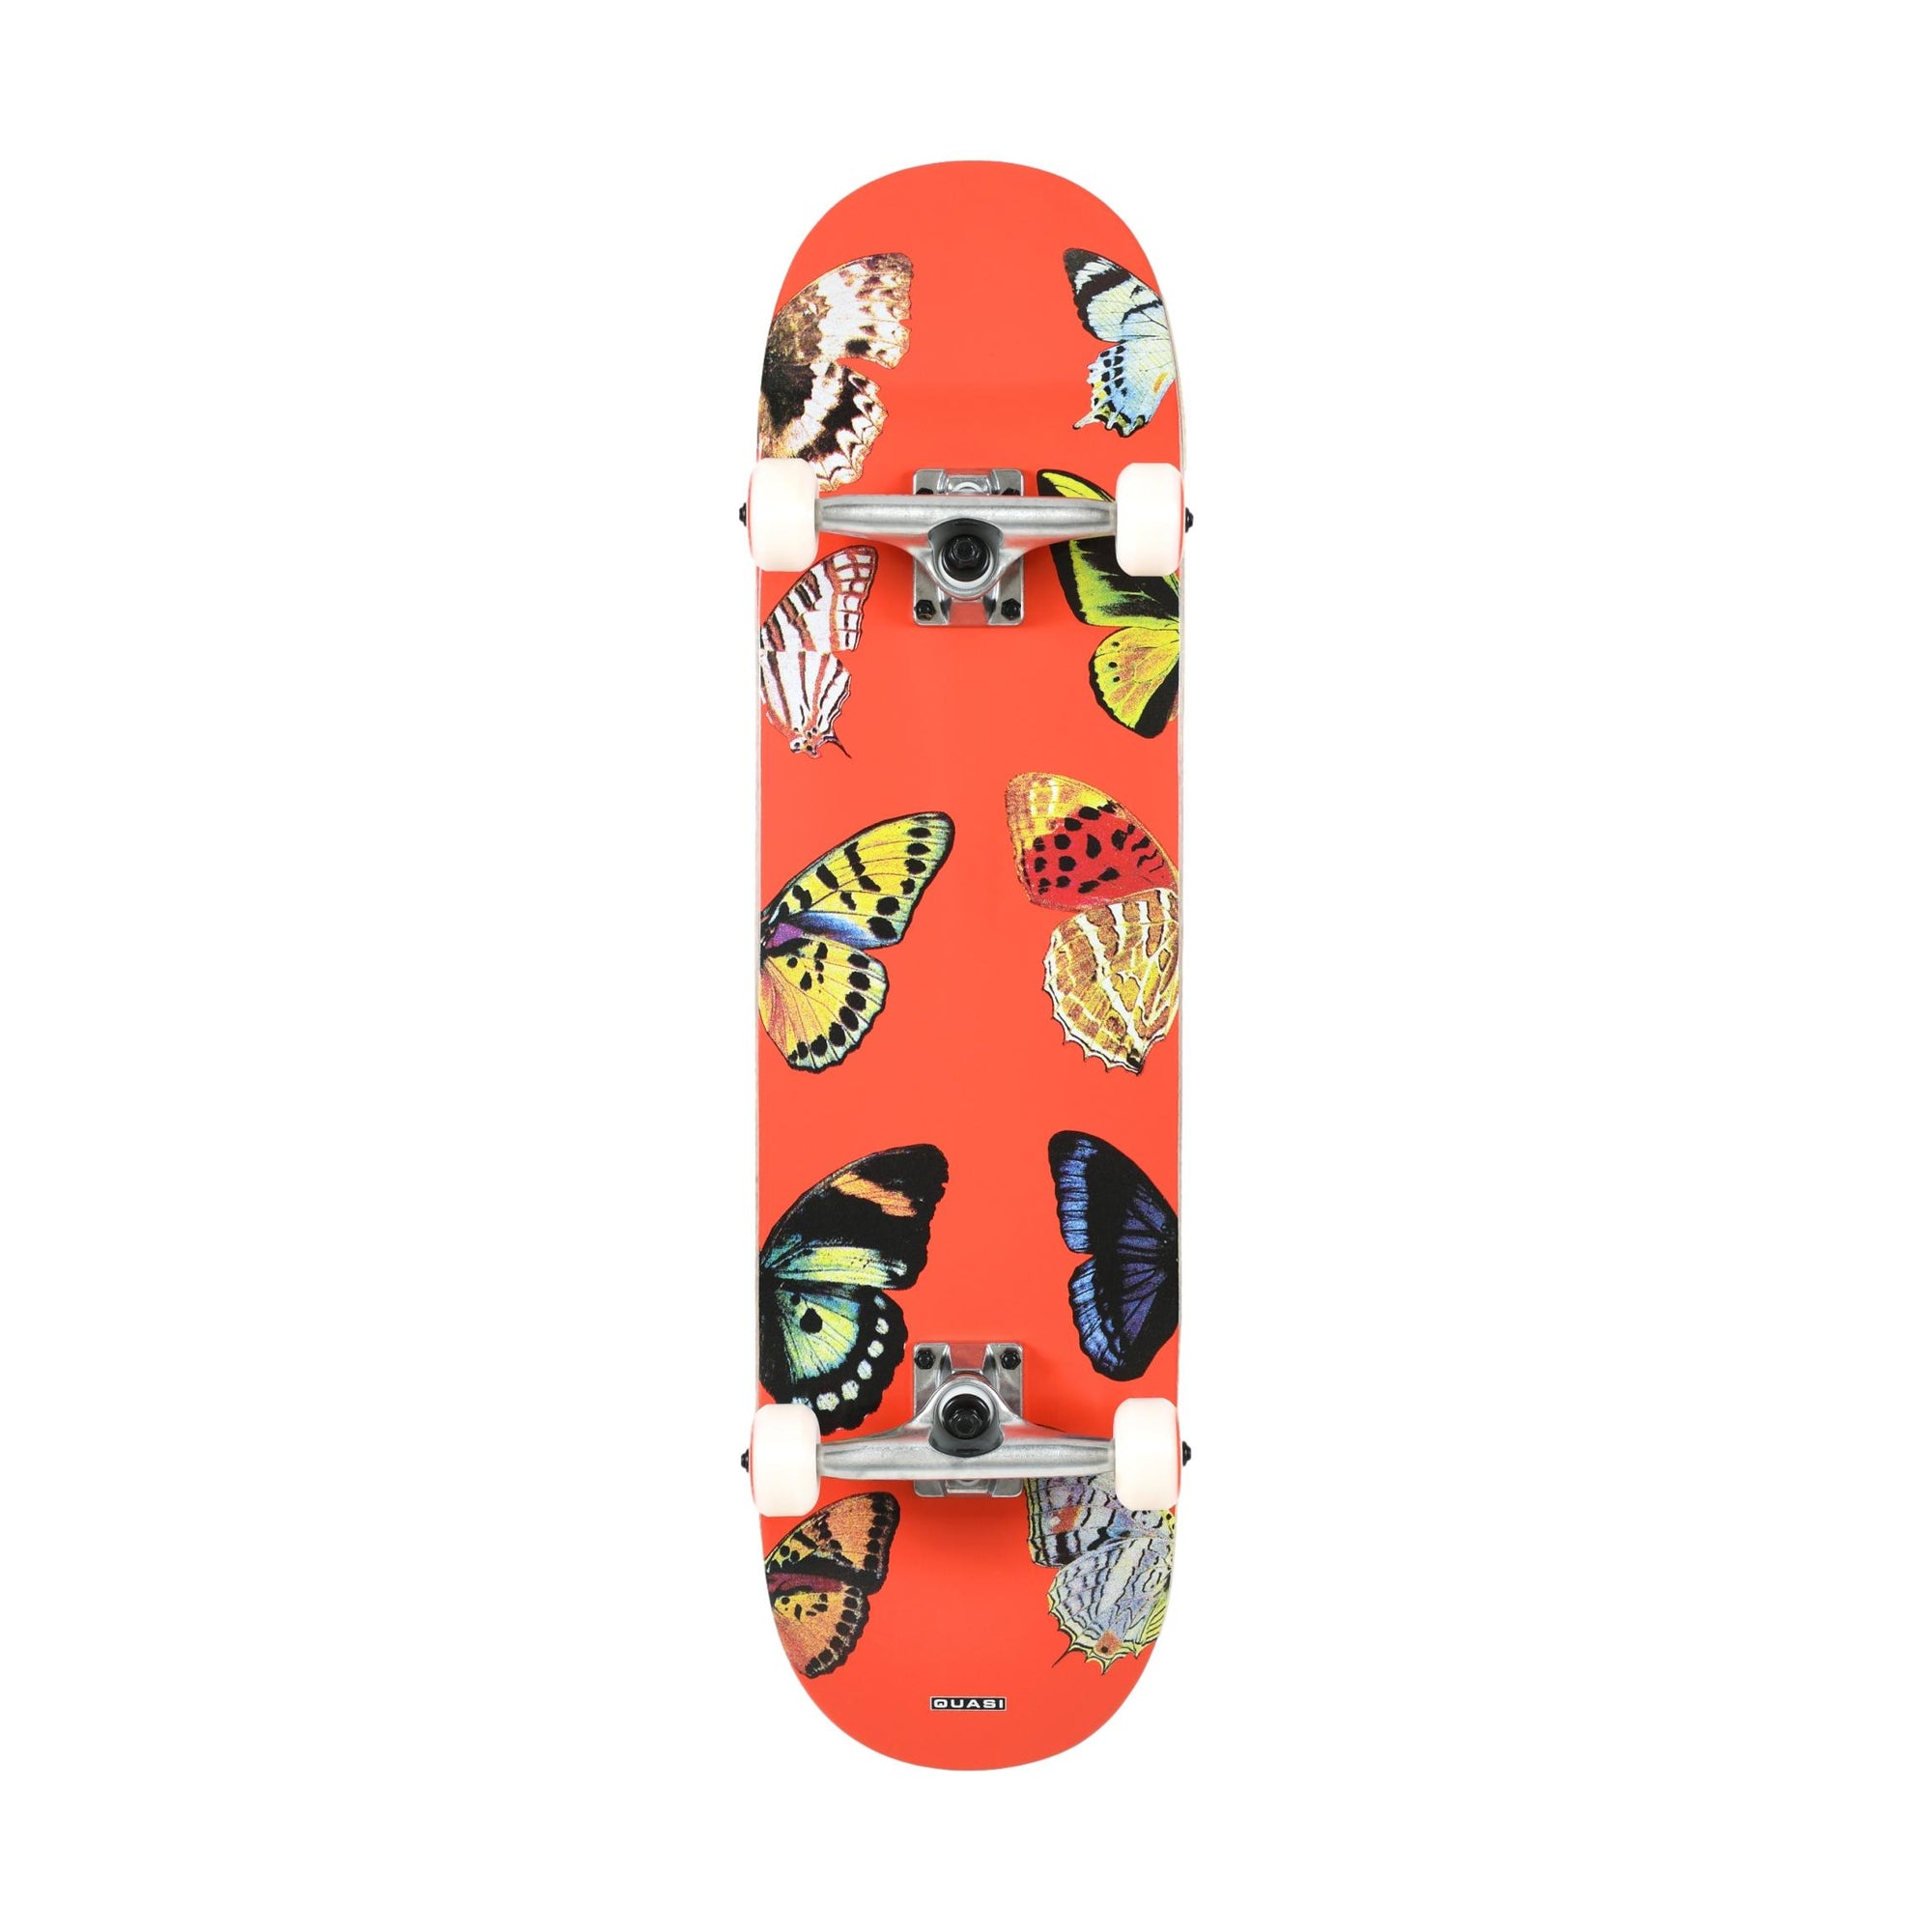 Quasi Butterfly 8.25" Complete - Venue Skateboards